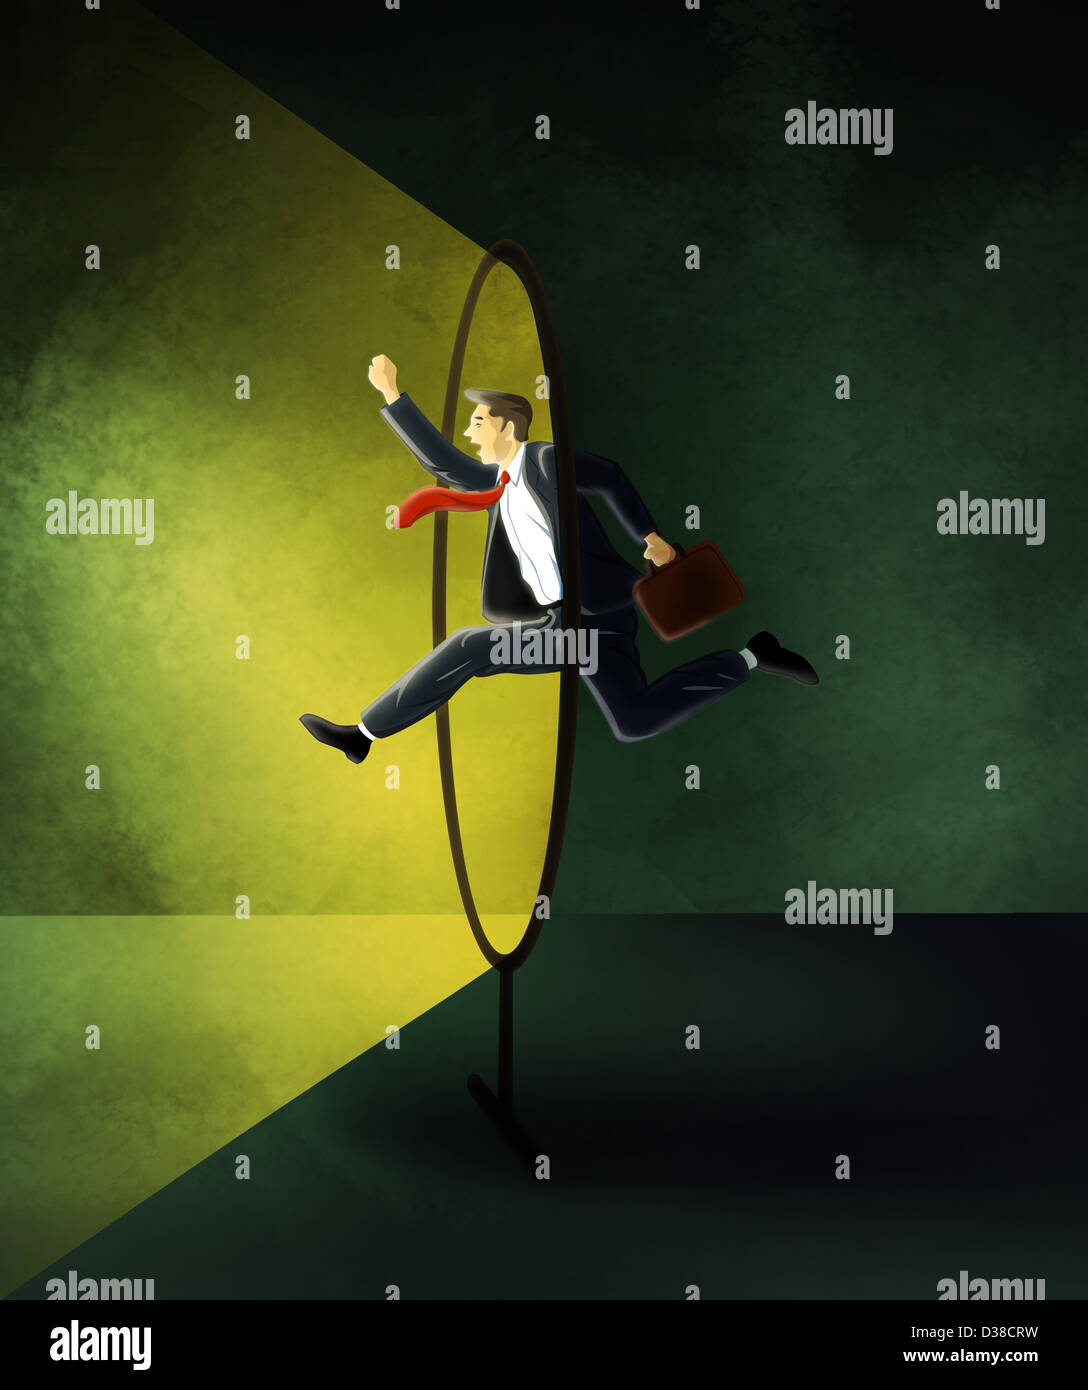 Illustrative image of businessman in mid air represents conquering adversity Stock Photo